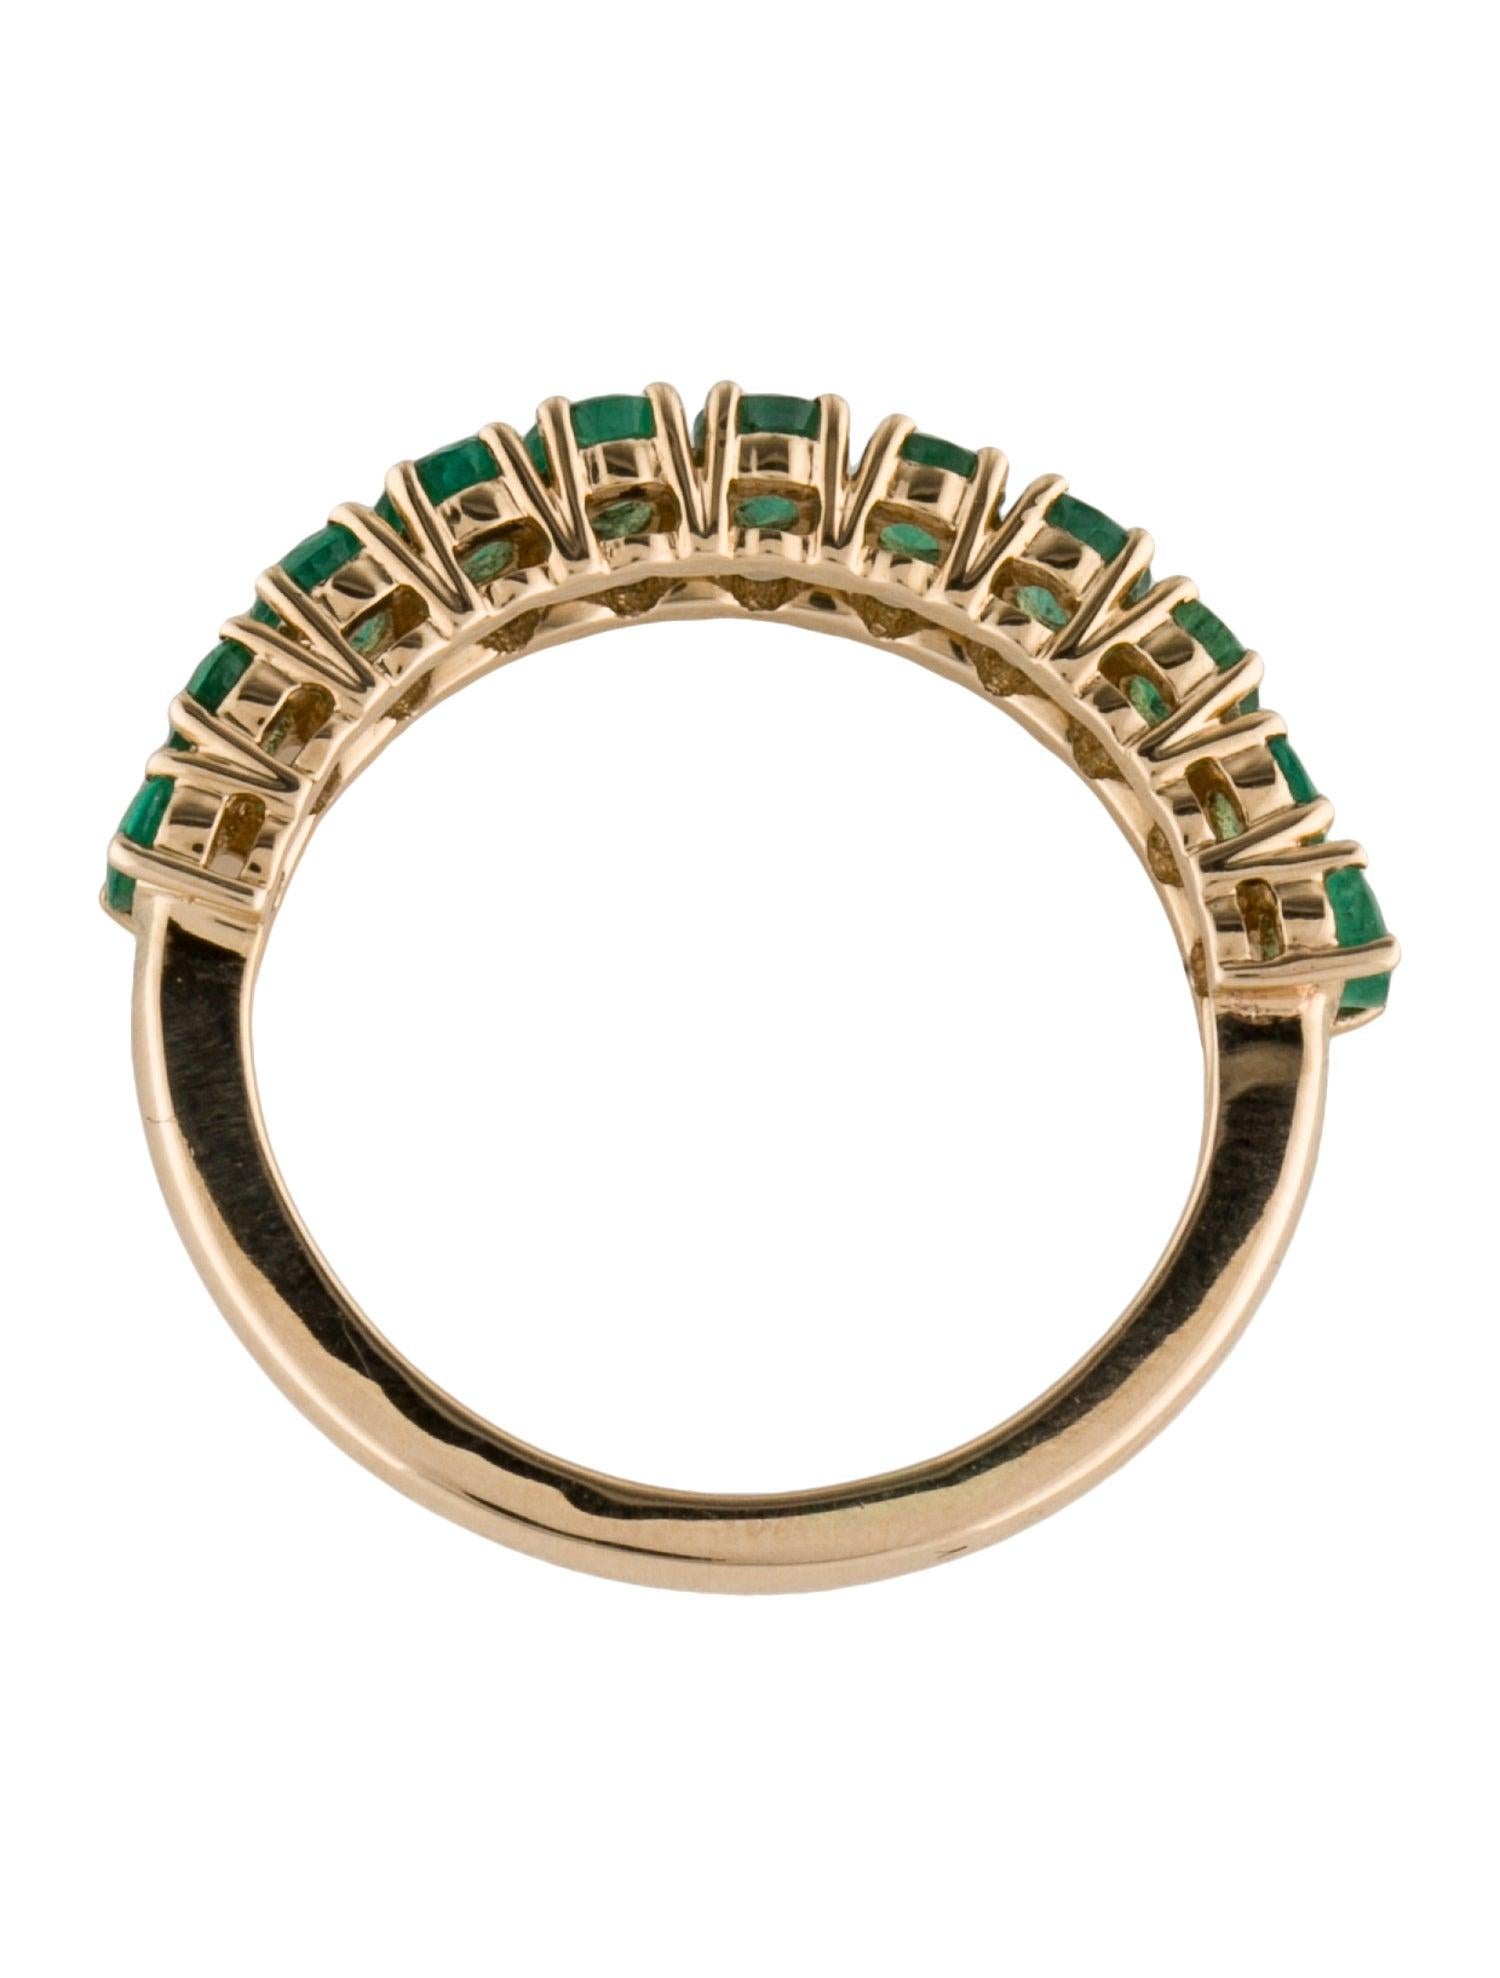 Exquisite 14K Emerald Band Ring - Size 8.75 - Luxurious Green Gemstone Jewelry In New Condition For Sale In Holtsville, NY